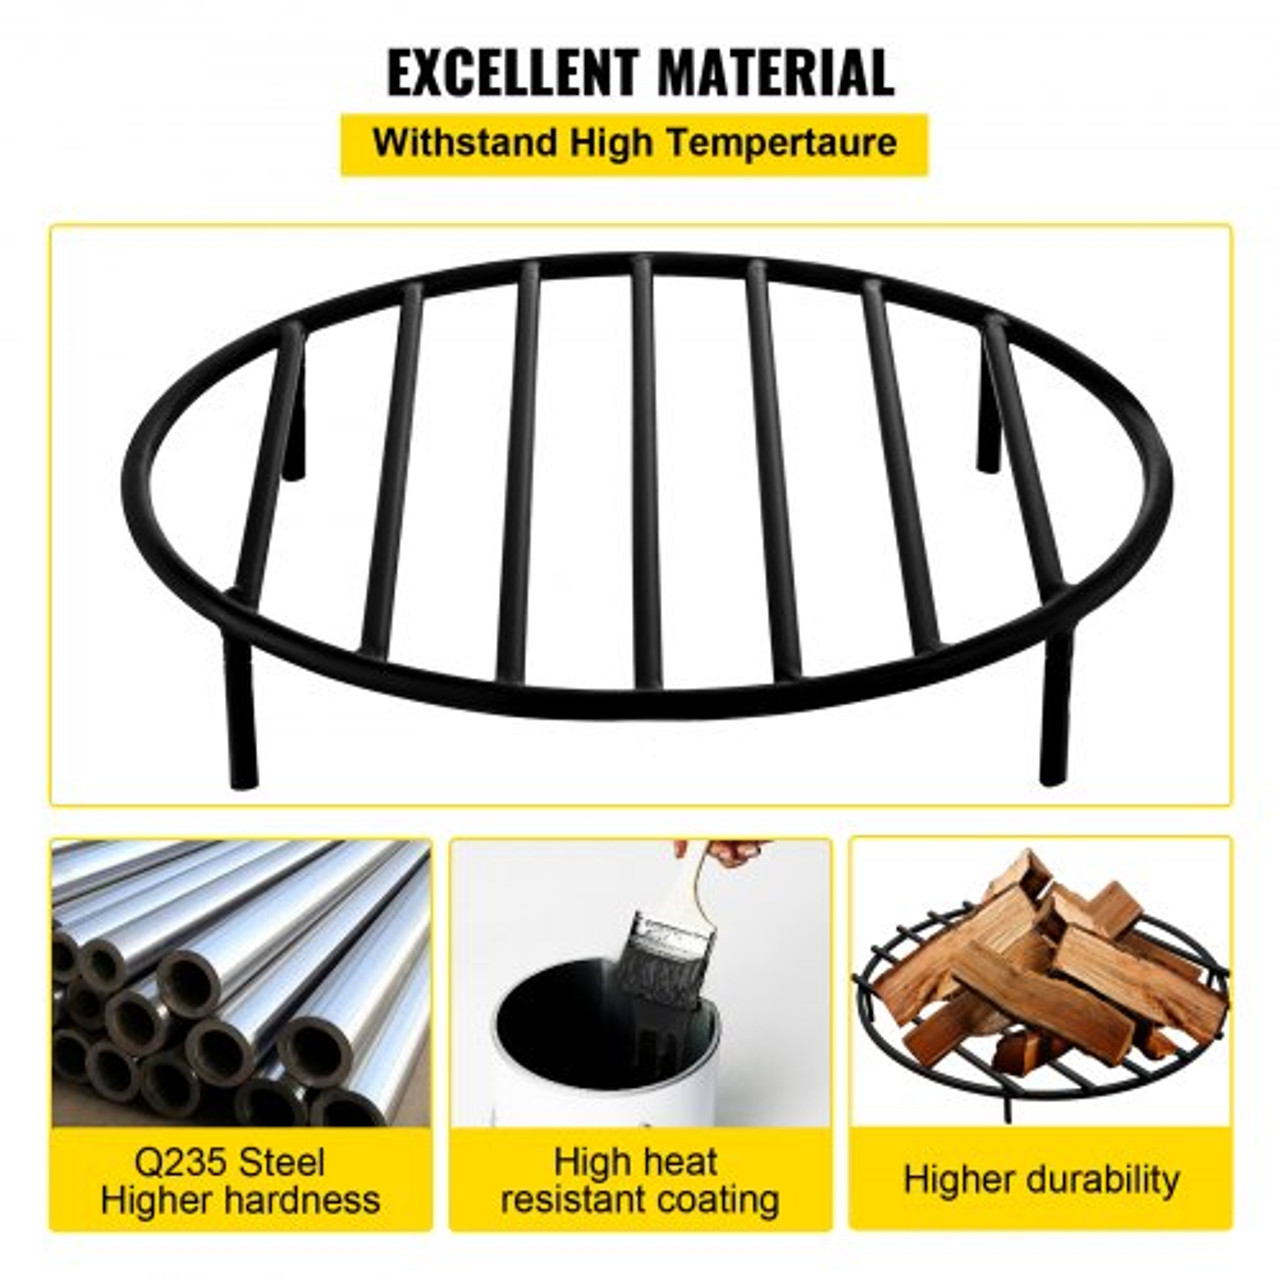 Fire Pit Grate, Heavy Duty Iron Round Firewood Grate, Round Wood Fire Pit Grate 22", Firepit Grate with Black Paint, Fire Grate with 4 Removable Round Legs for Burning Fireplace and Firepits